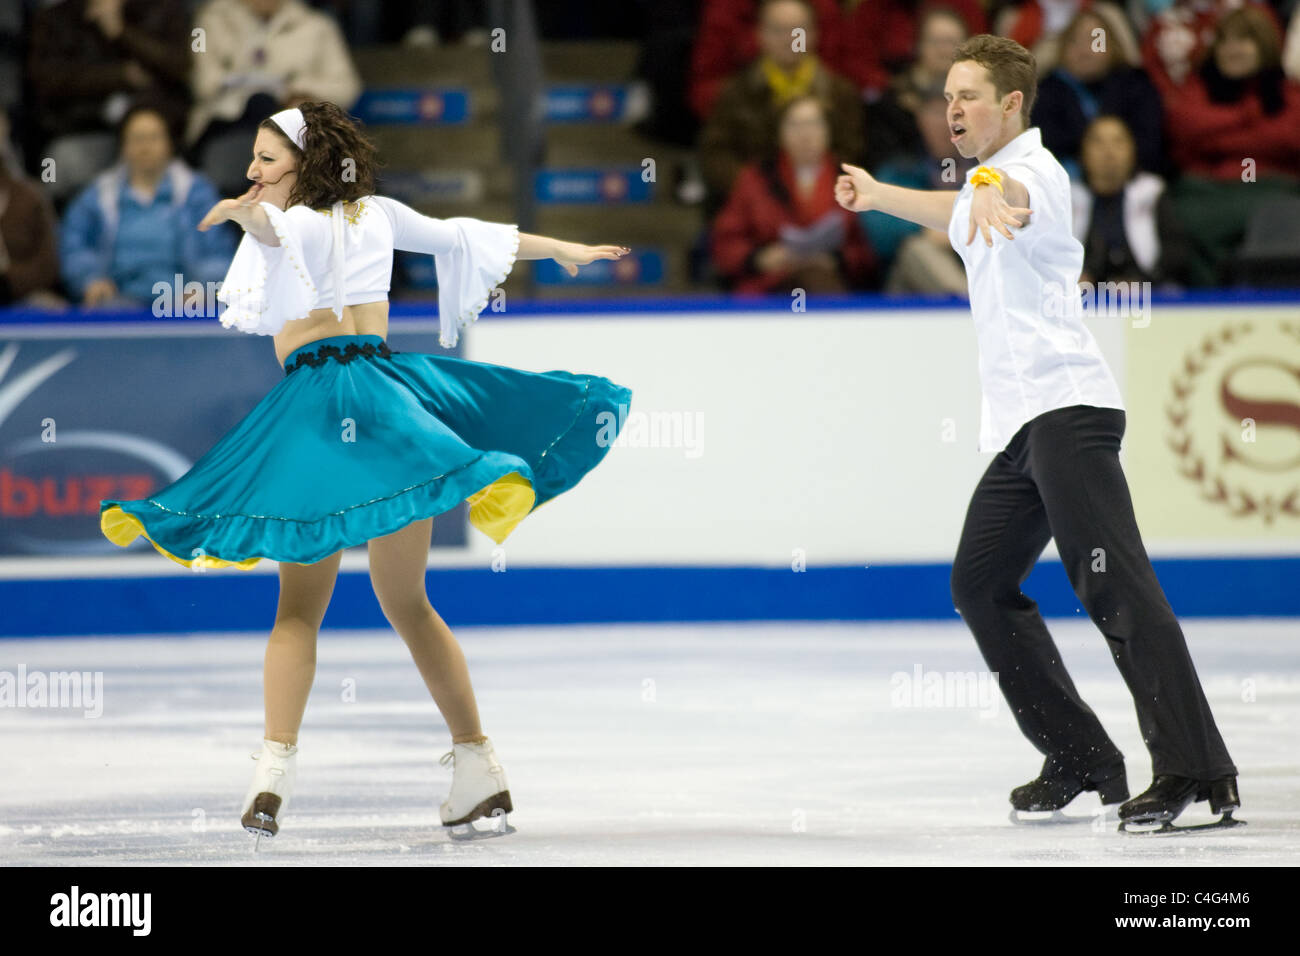 Sophie Knippel and Bejamine Westenberger compete at the 2010 BMO Skate Canada in London Ontario Canada. Stock Photo